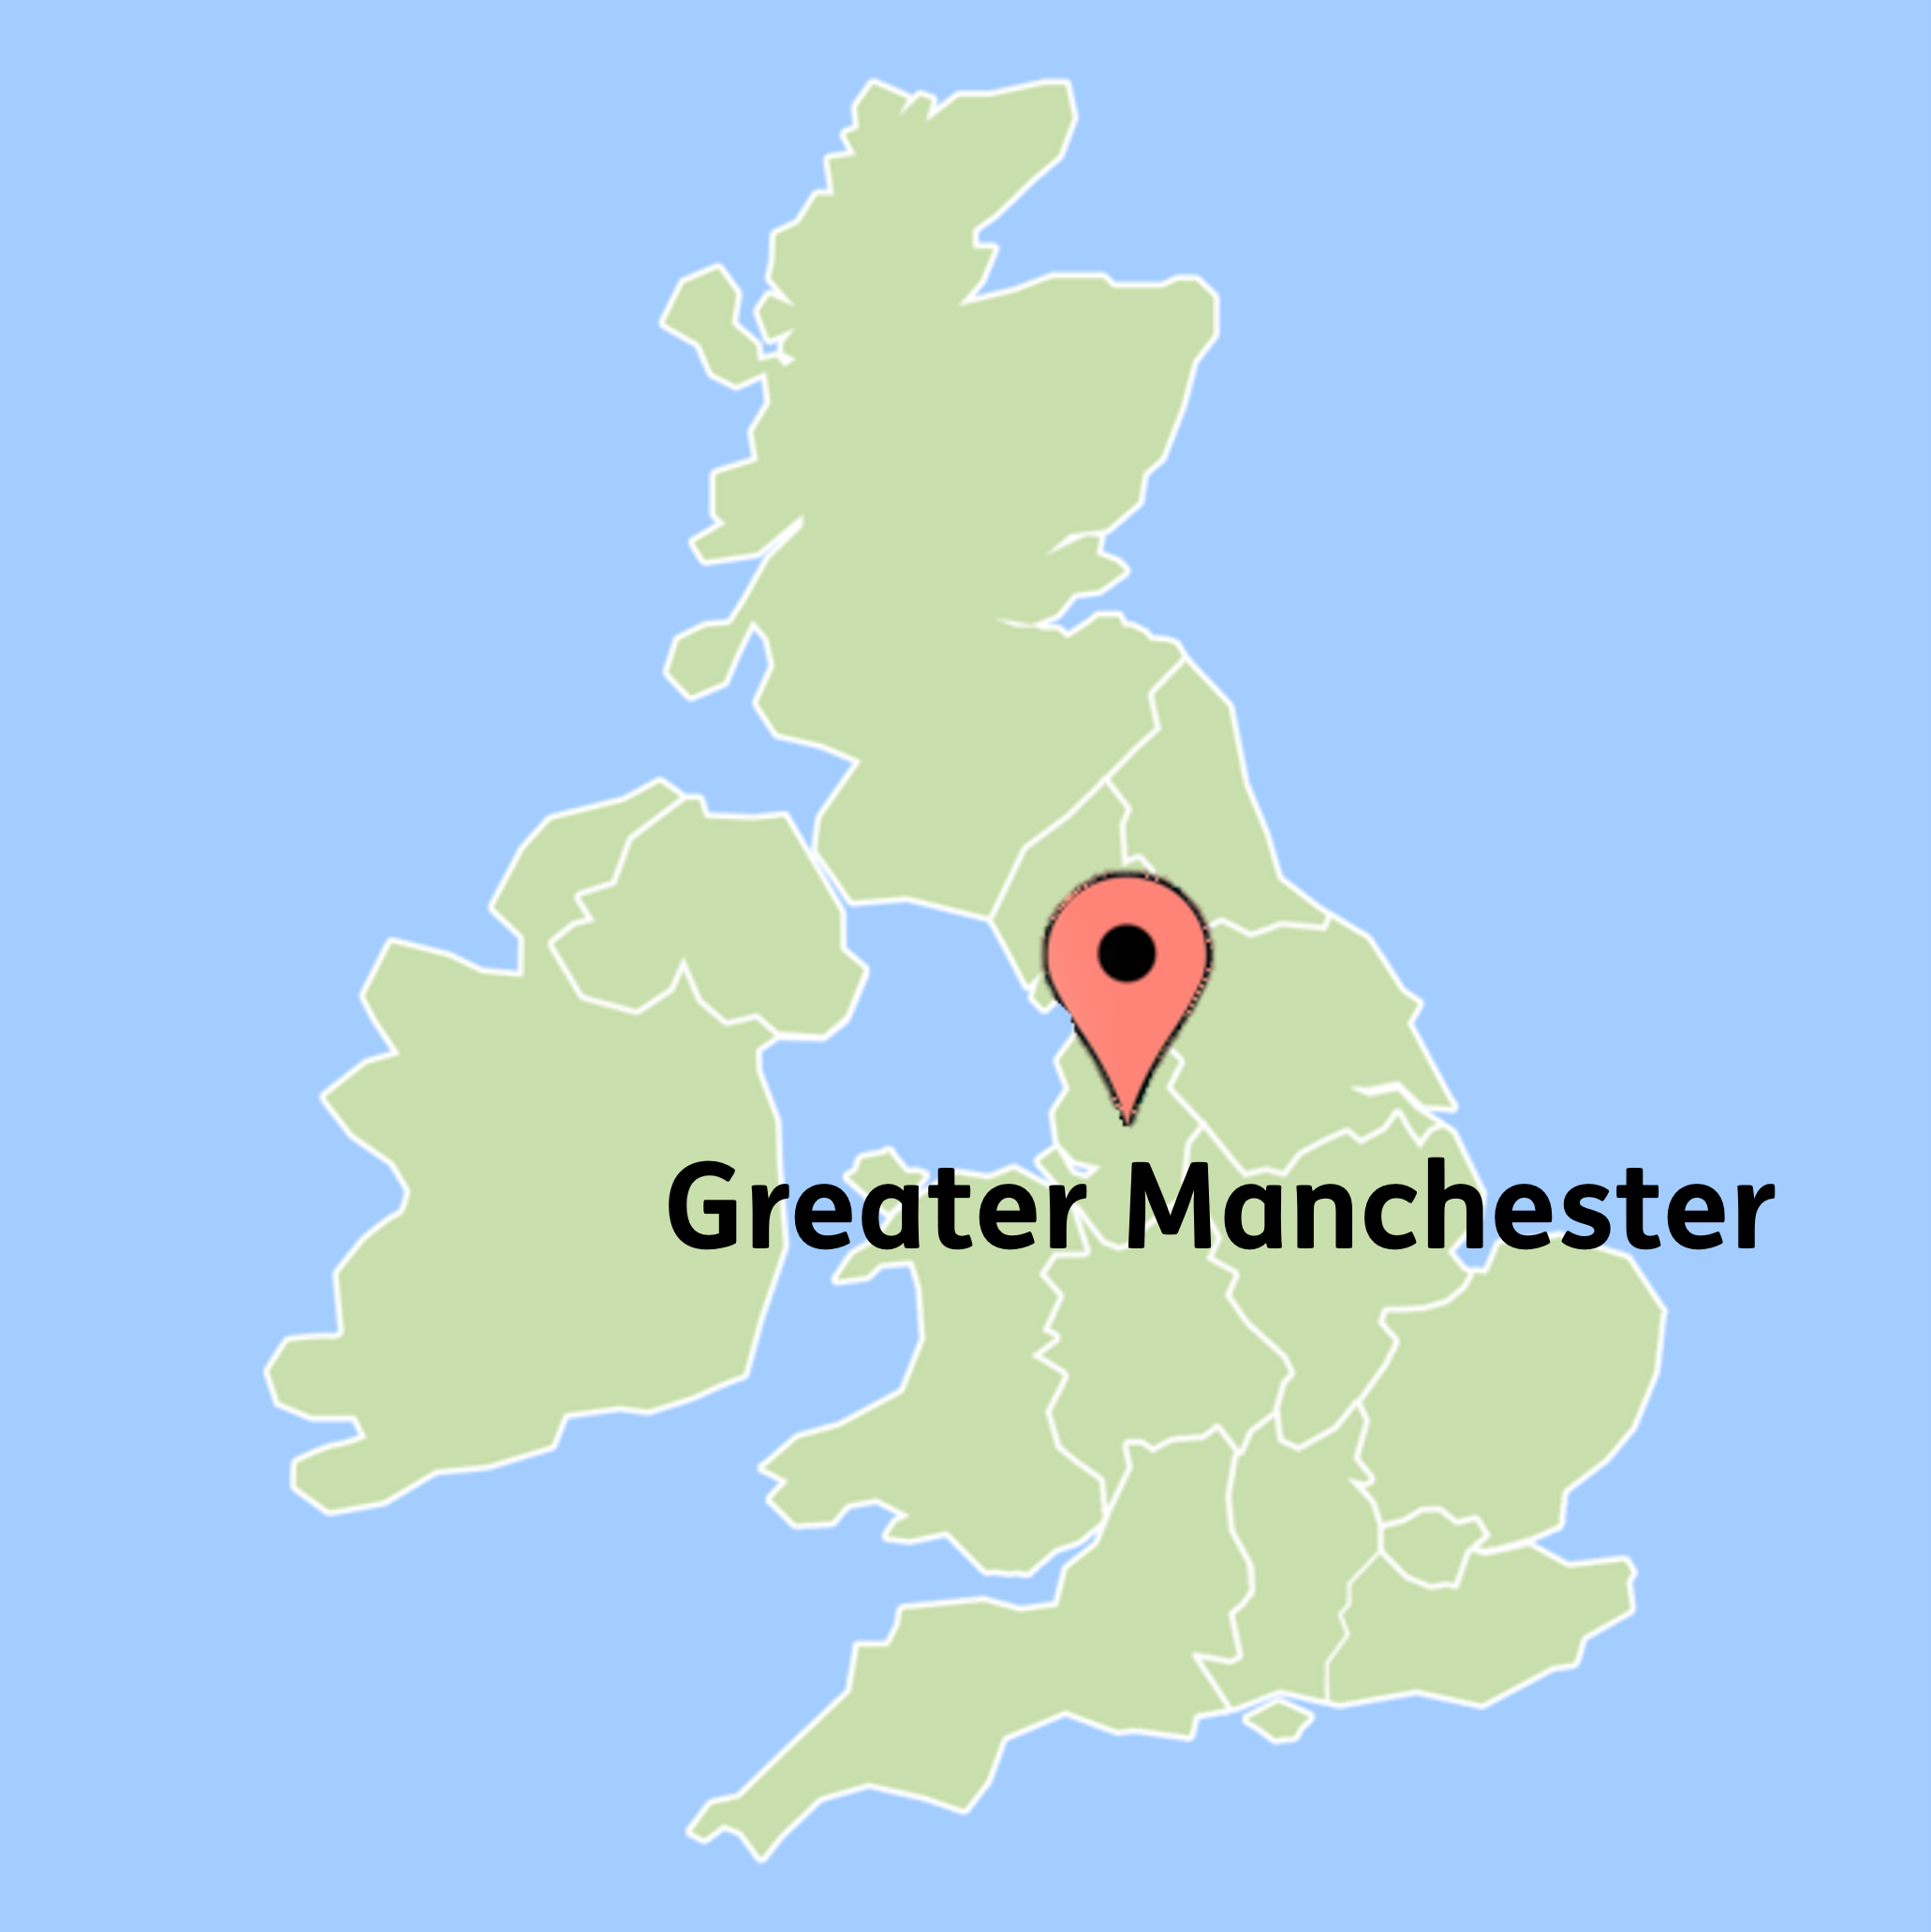 A map of the UK with a map pin on Greater Manchester